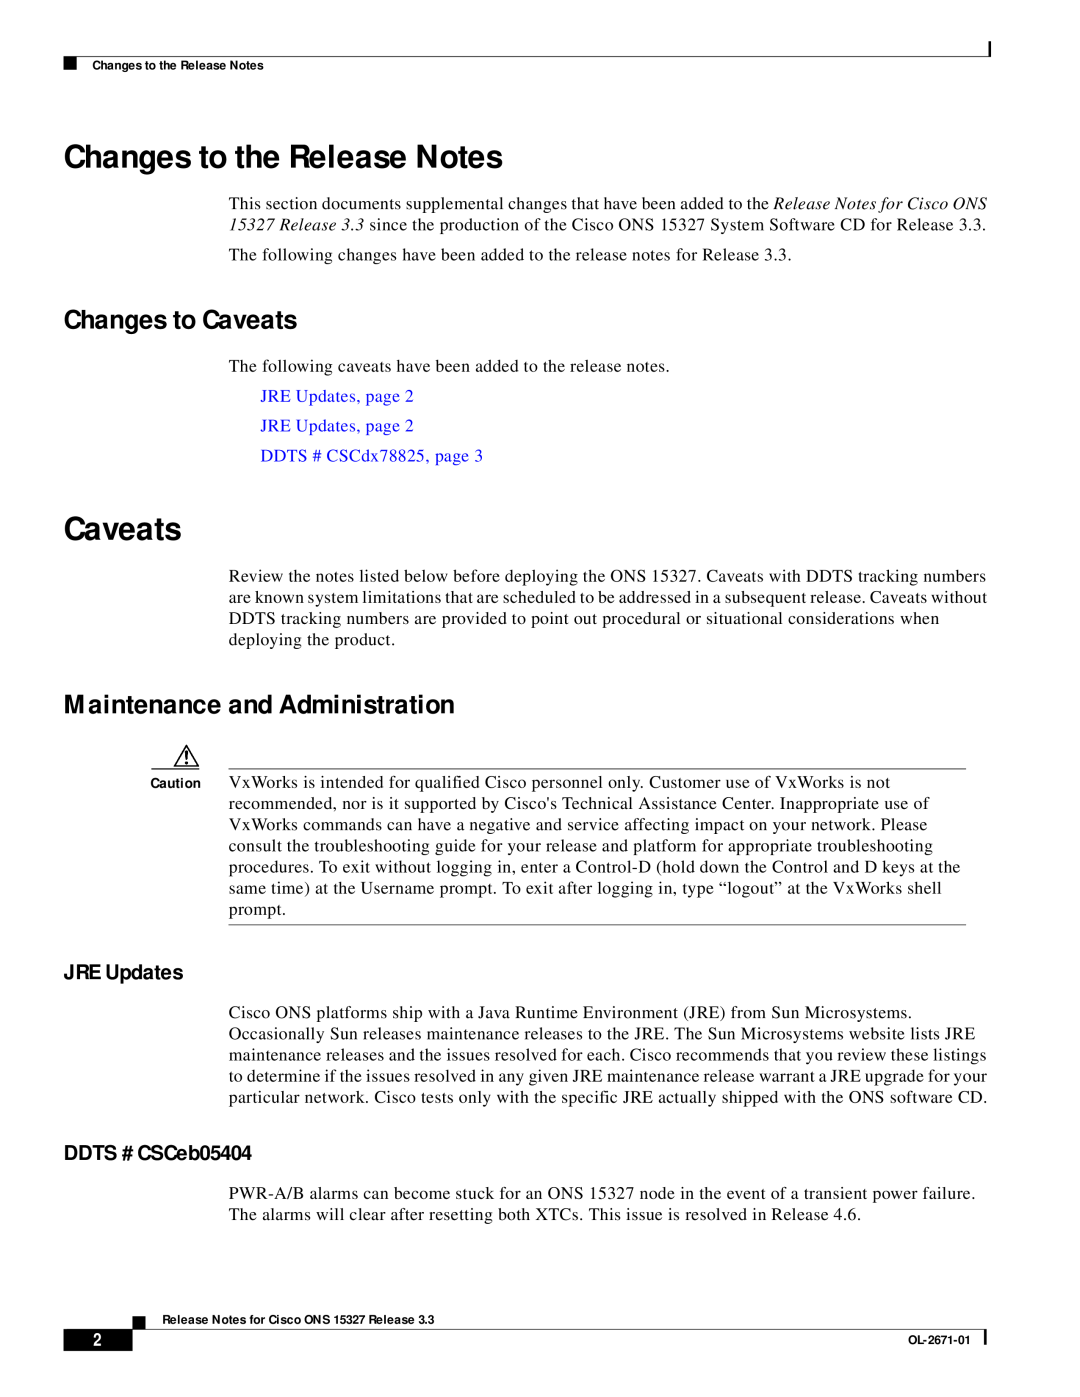 Cisco Systems ONS 15327 Changes to the Release Notes, Changes to Caveats, Maintenance and Administration, JRE Updates 